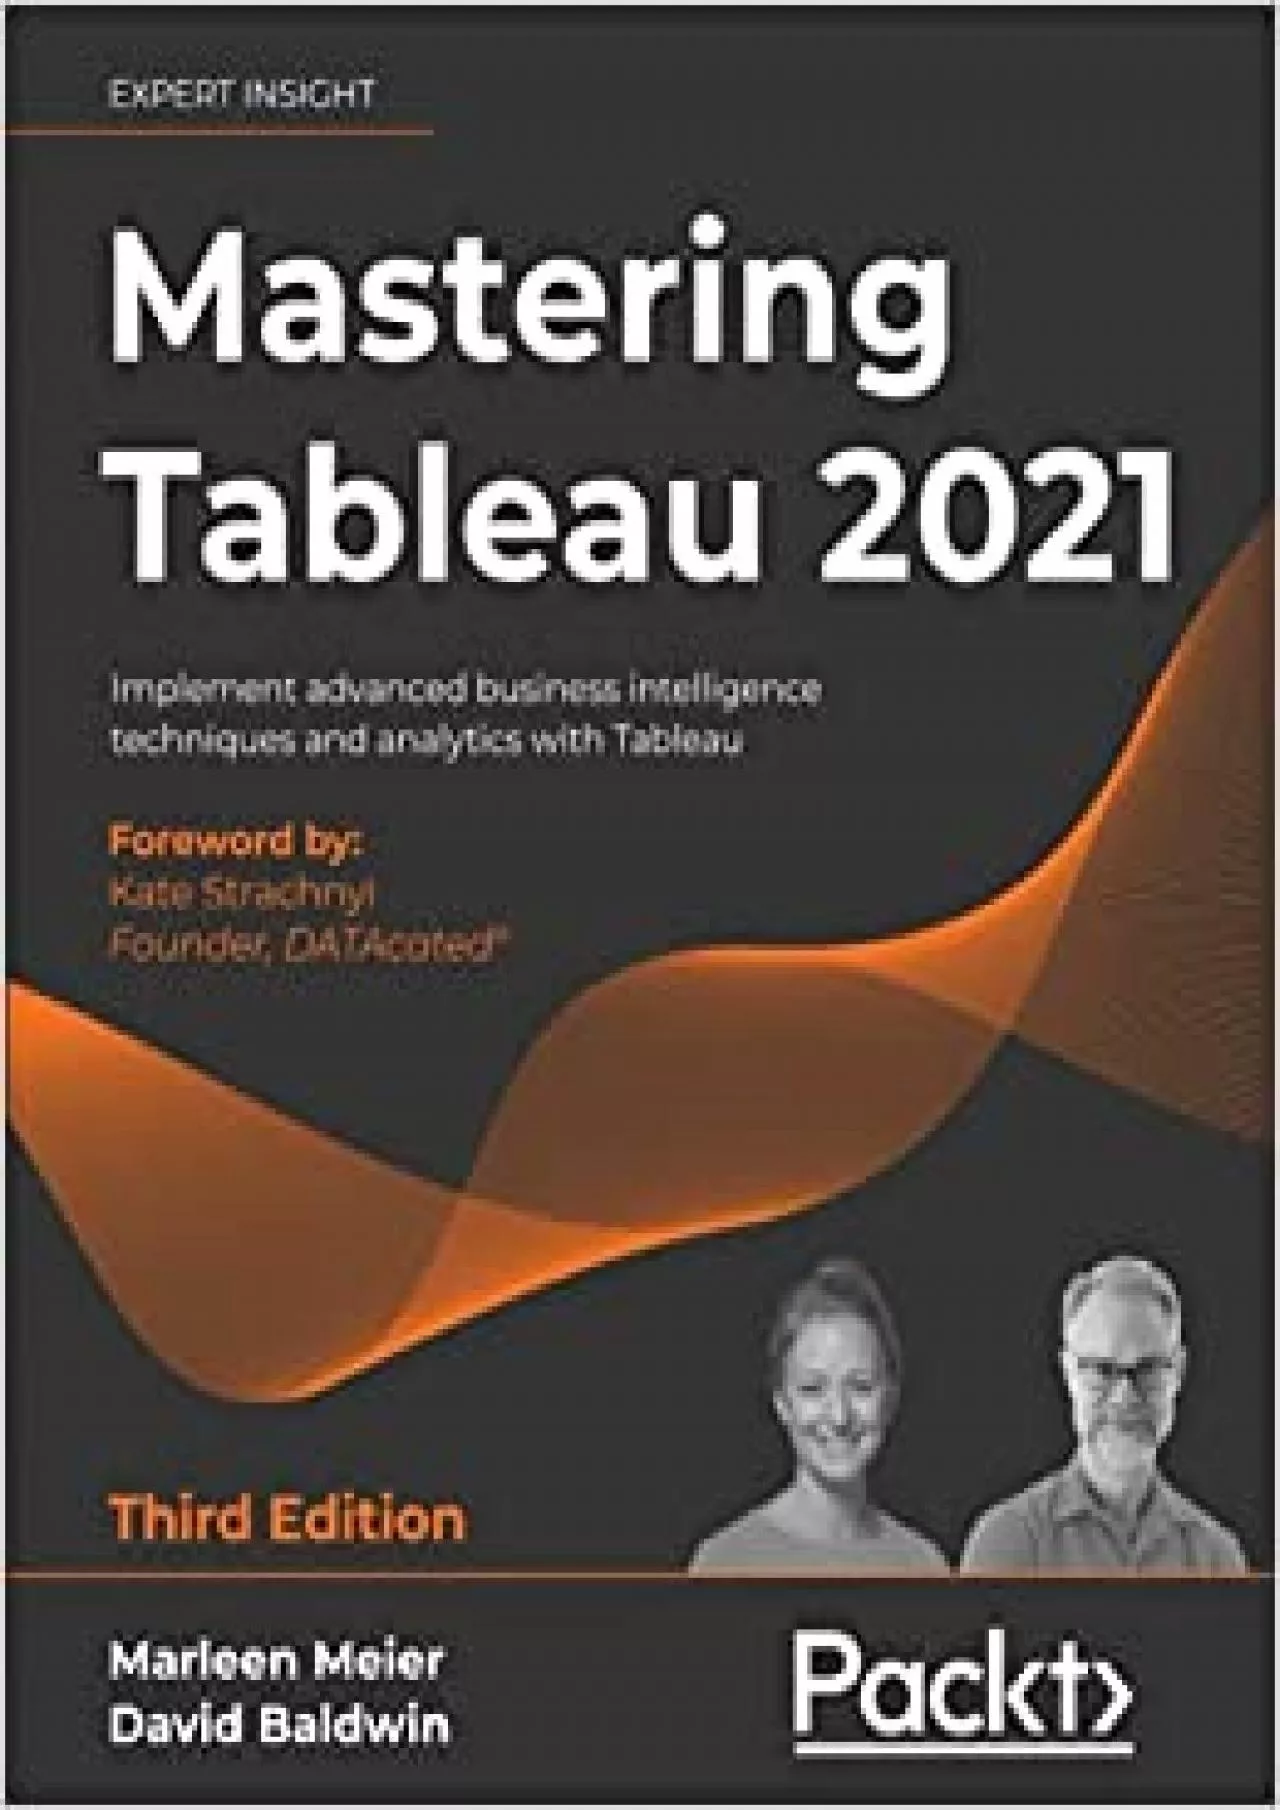 Mastering Tableau 2021: Implement advanced business intelligence techniques and analytics